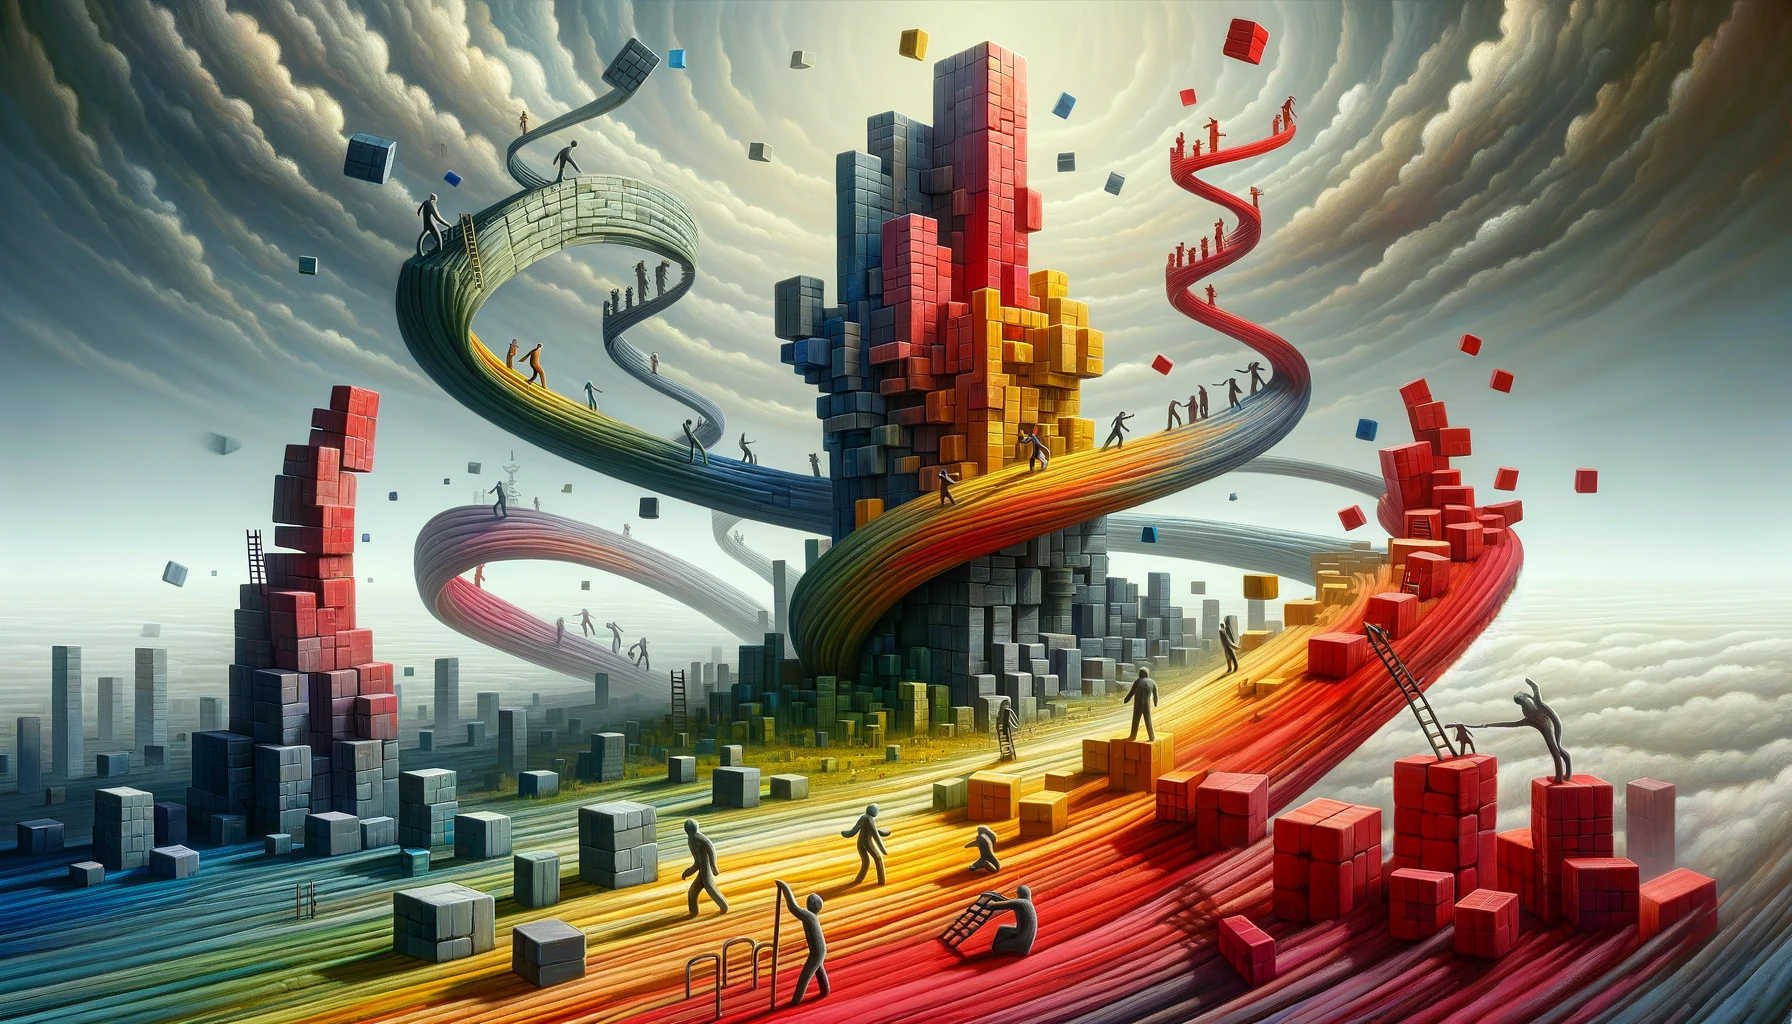 The image depicts a surreal landscape where whimsical figures attempt to stack bricks to build a skyscraper. The structure defies the laws of physics, twisting and turning in dream-like ways. It's illuminated in an abstract, surreal light, with a color palette of Light Gray, Dark Gray, Bright Red, Yellow, and Blue. Some bricks appear almost melting, falling off as the skyscraper bends impossibly, showcasing the chaotic and doomed attempt.